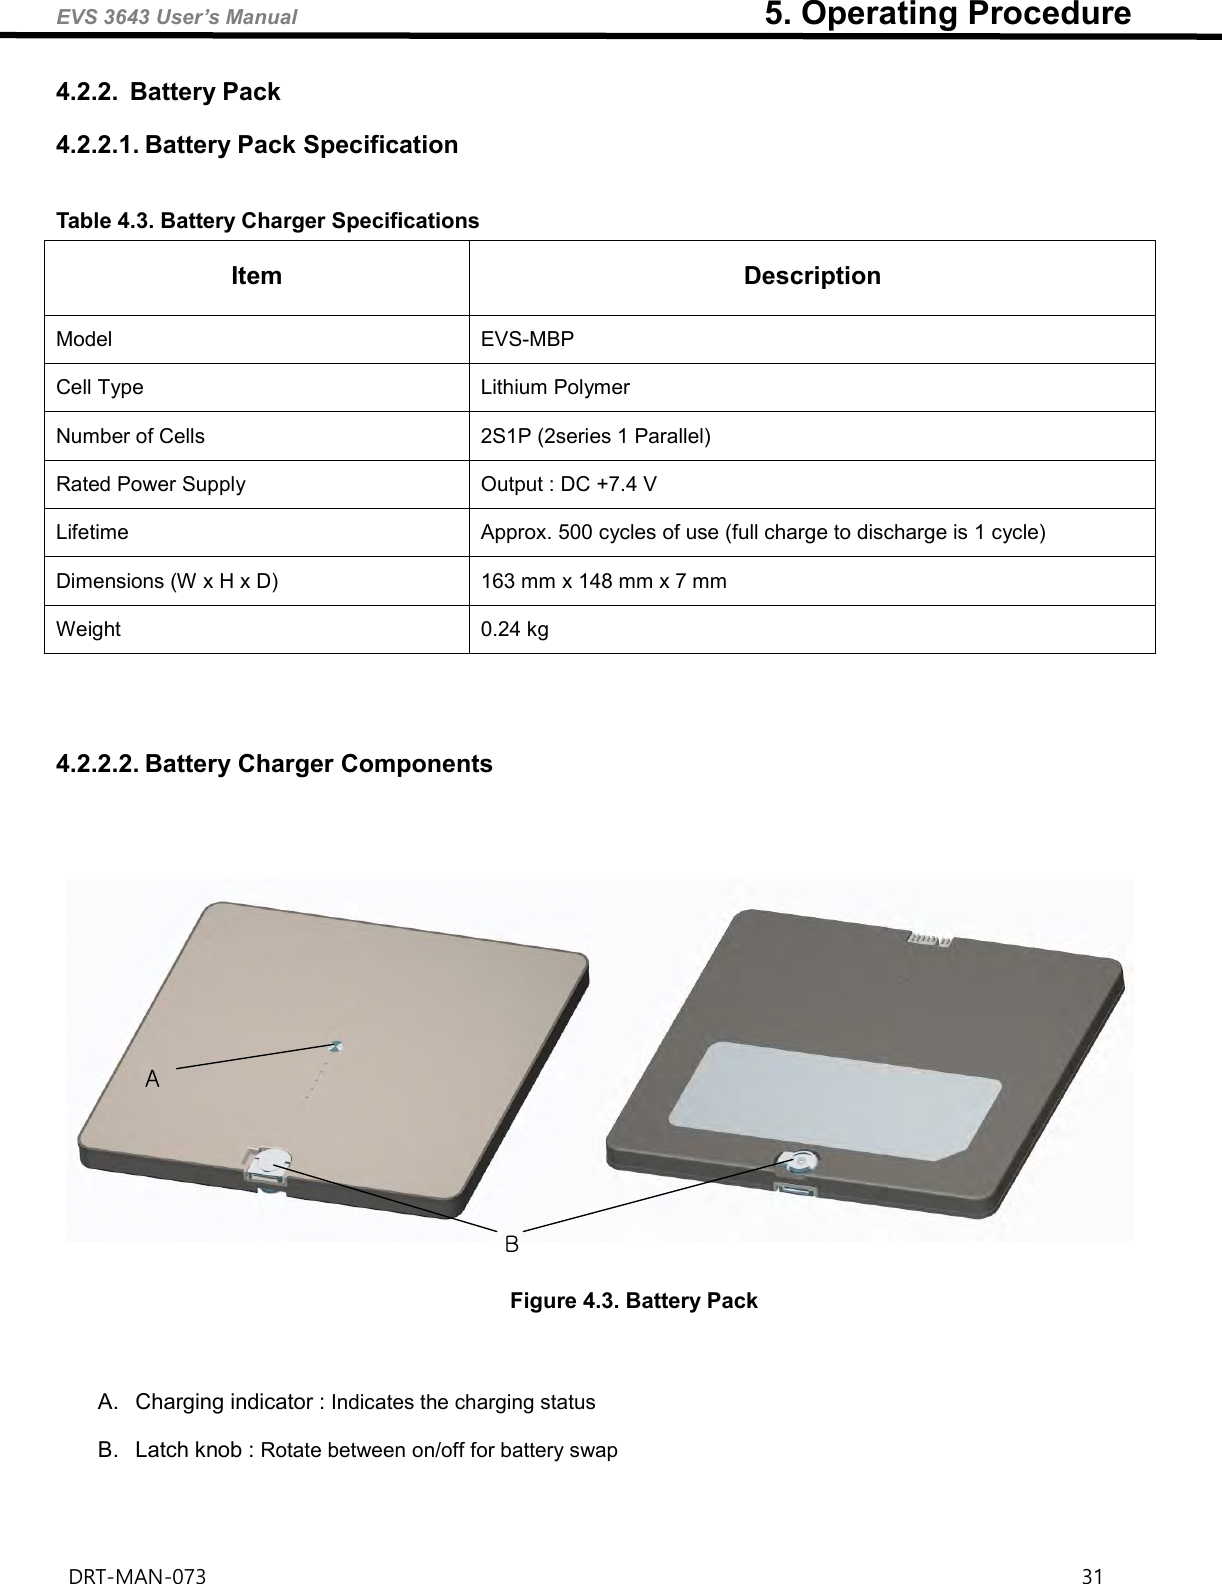 EVS 3643 User’s Manual                                                        5. Operating Procedure DRT-MAN-073                                                                                                                                                                31   4.2.2.  Battery Pack 4.2.2.1. Battery Pack Specification  Table 4.3. Battery Charger Specifications Item Description Model EVS-MBP Cell Type   Lithium Polymer     Number of Cells 2S1P (2series 1 Parallel) Rated Power Supply Output : DC +7.4 V   Lifetime Approx. 500 cycles of use (full charge to discharge is 1 cycle)   Dimensions (W x H x D) 163 mm x 148 mm x 7 mm Weight 0.24 kg     4.2.2.2. Battery Charger Components    AB Figure 4.3. Battery Pack    A.  Charging indicator : Indicates the charging status  B.  Latch knob : Rotate between on/off for battery swap    